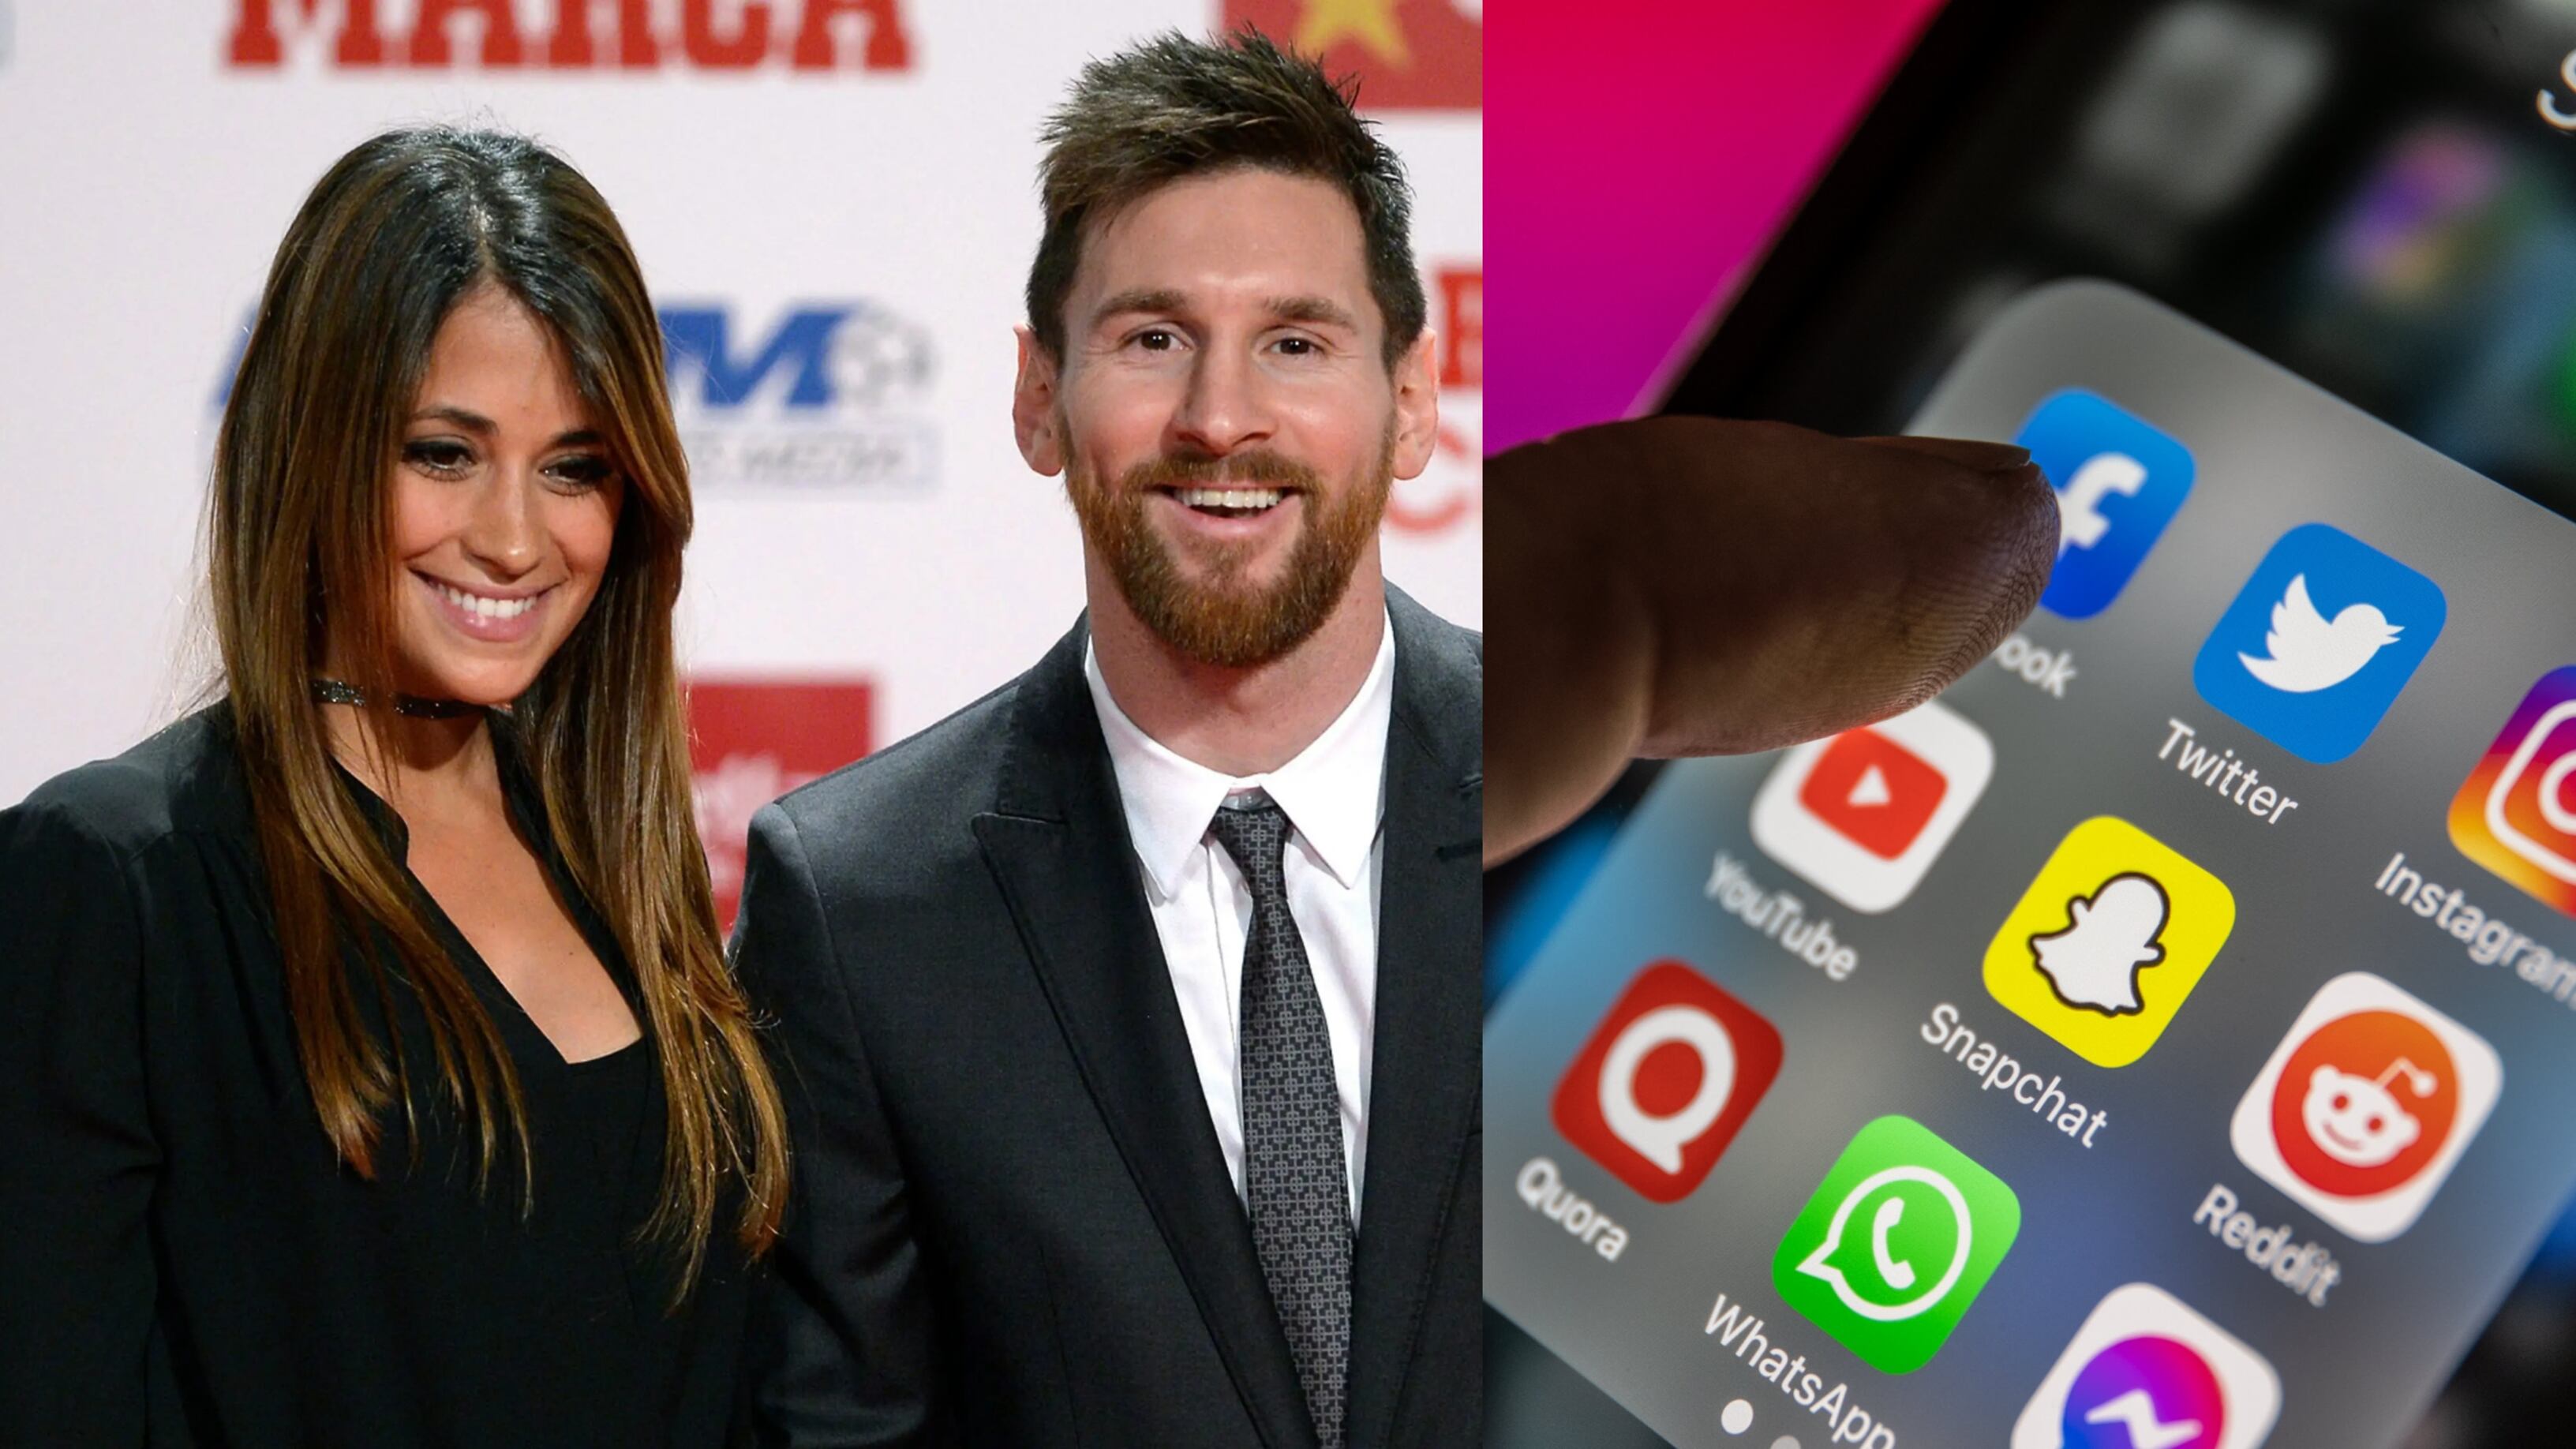 What will Messi think? The inappropriate comments Antonela received on Instagram